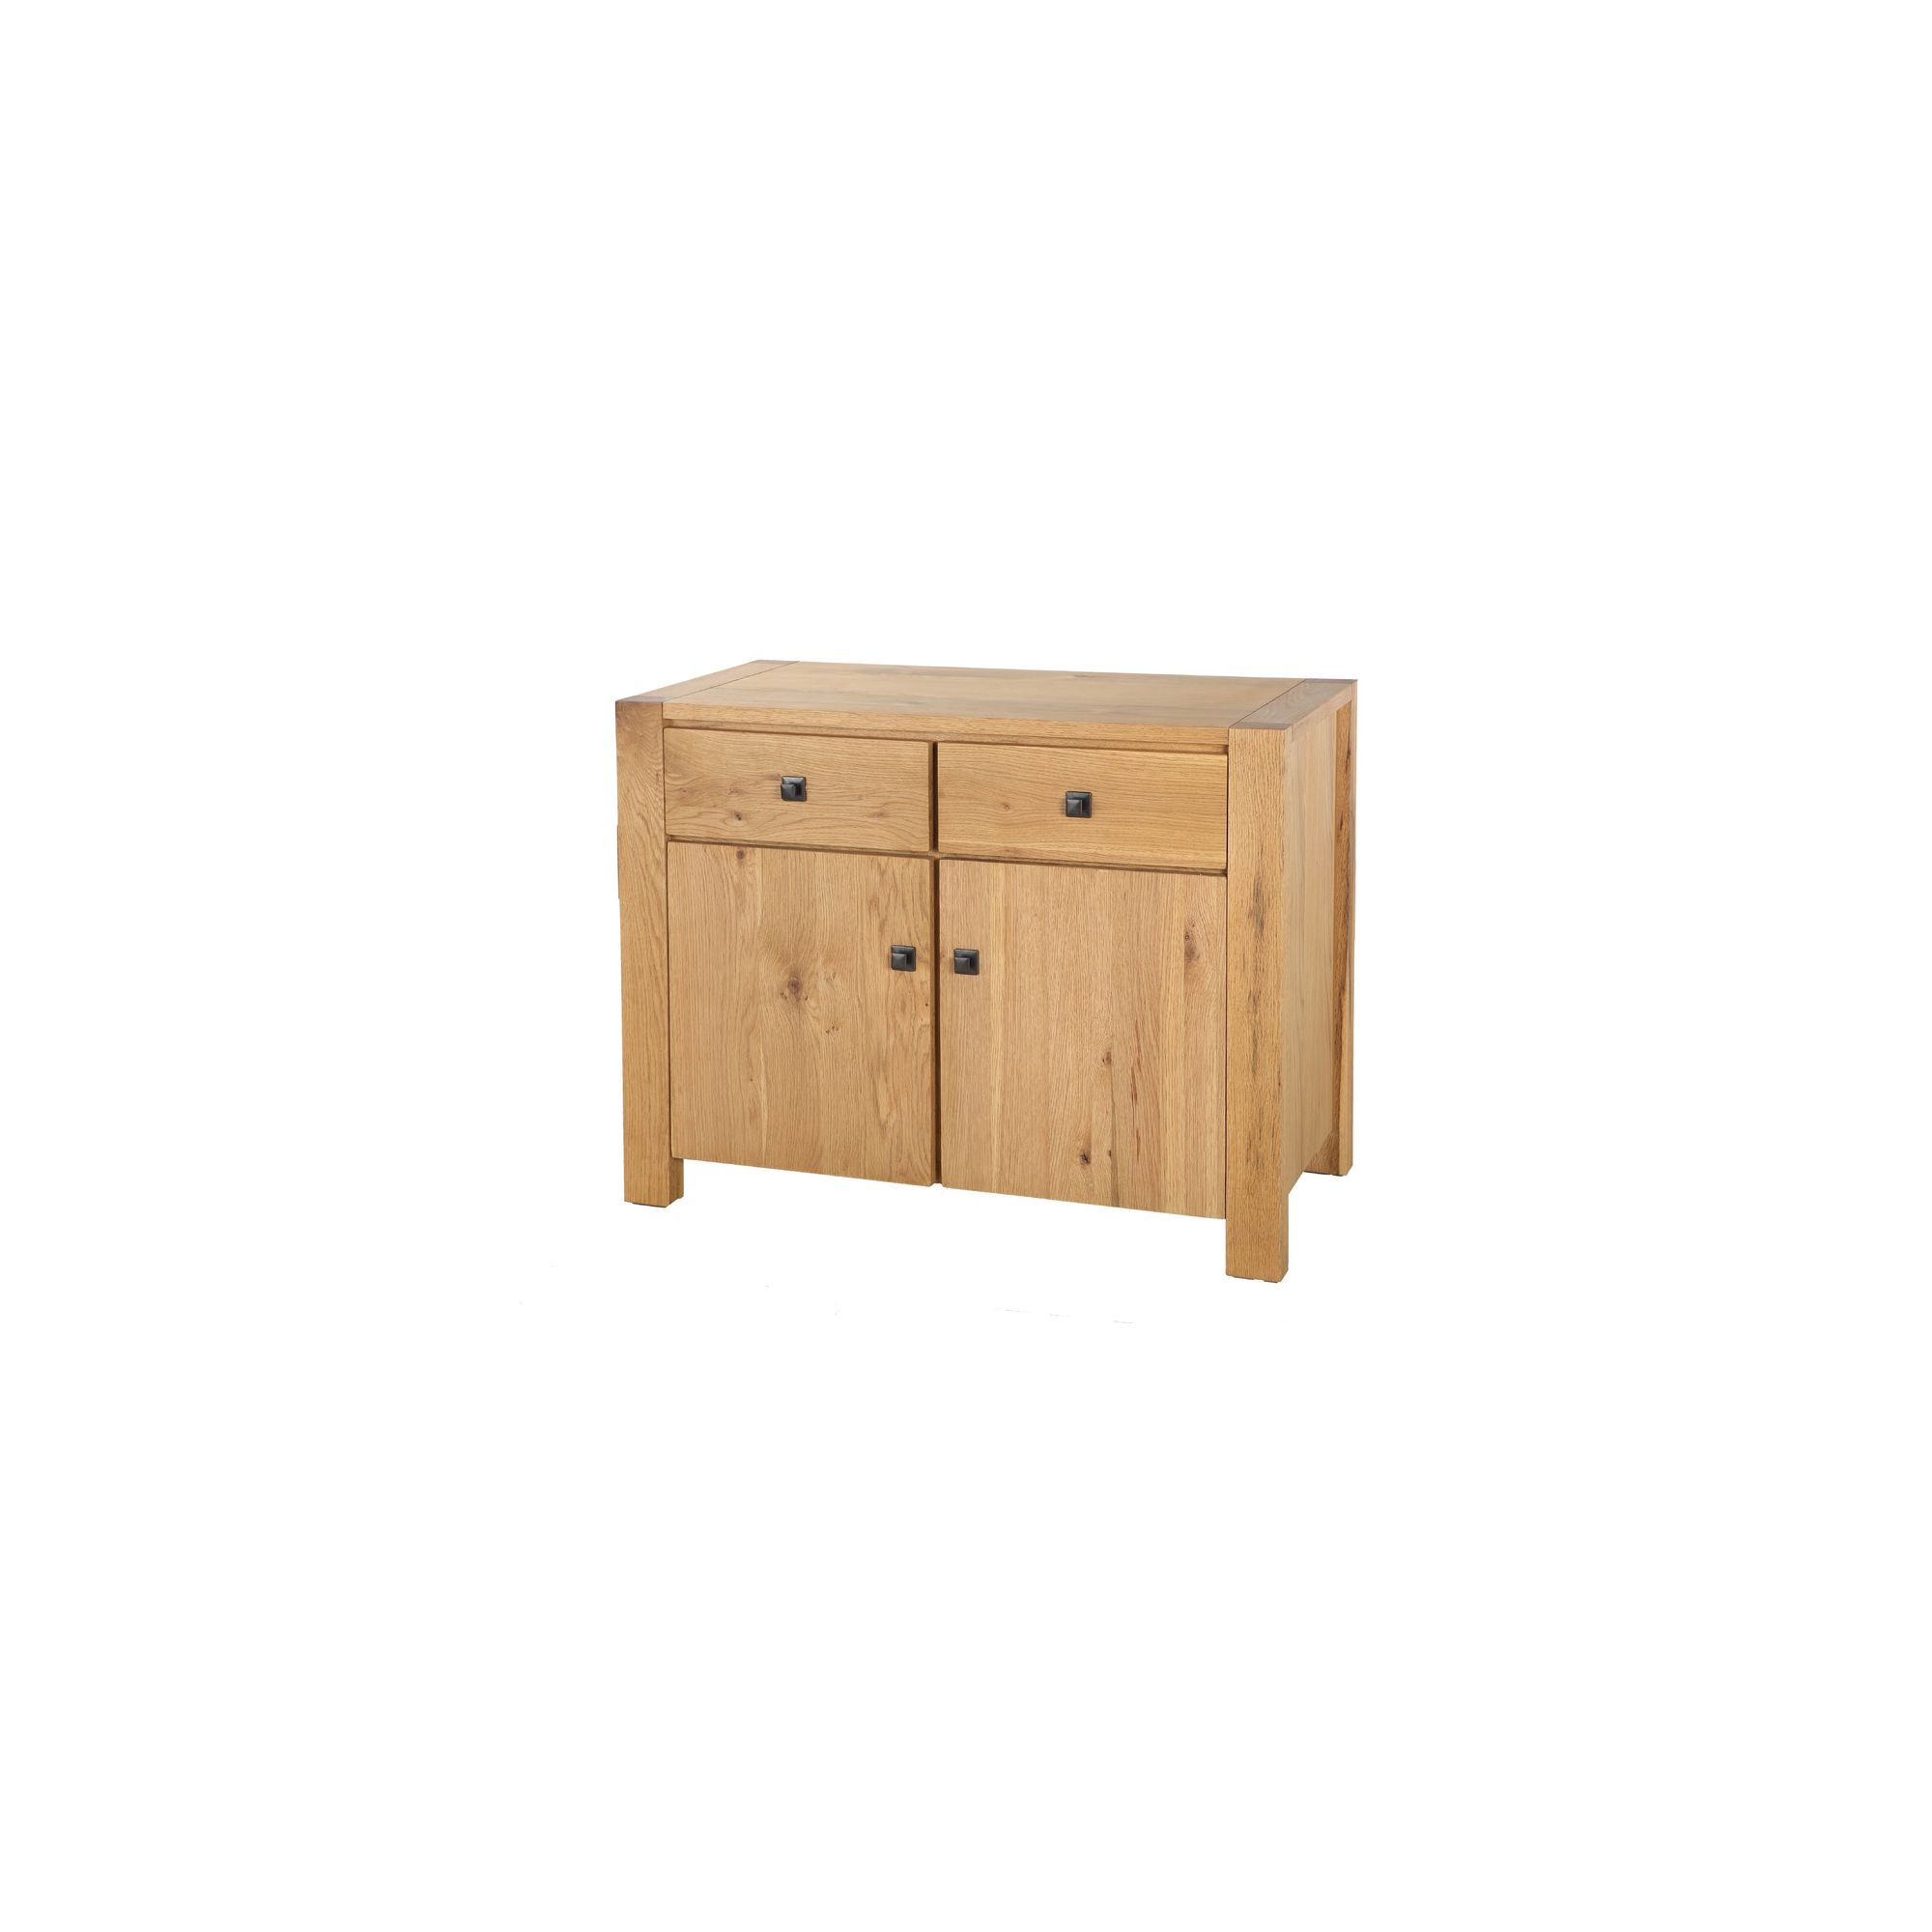 Oakinsen Clermont Small Sideboard at Tesco Direct